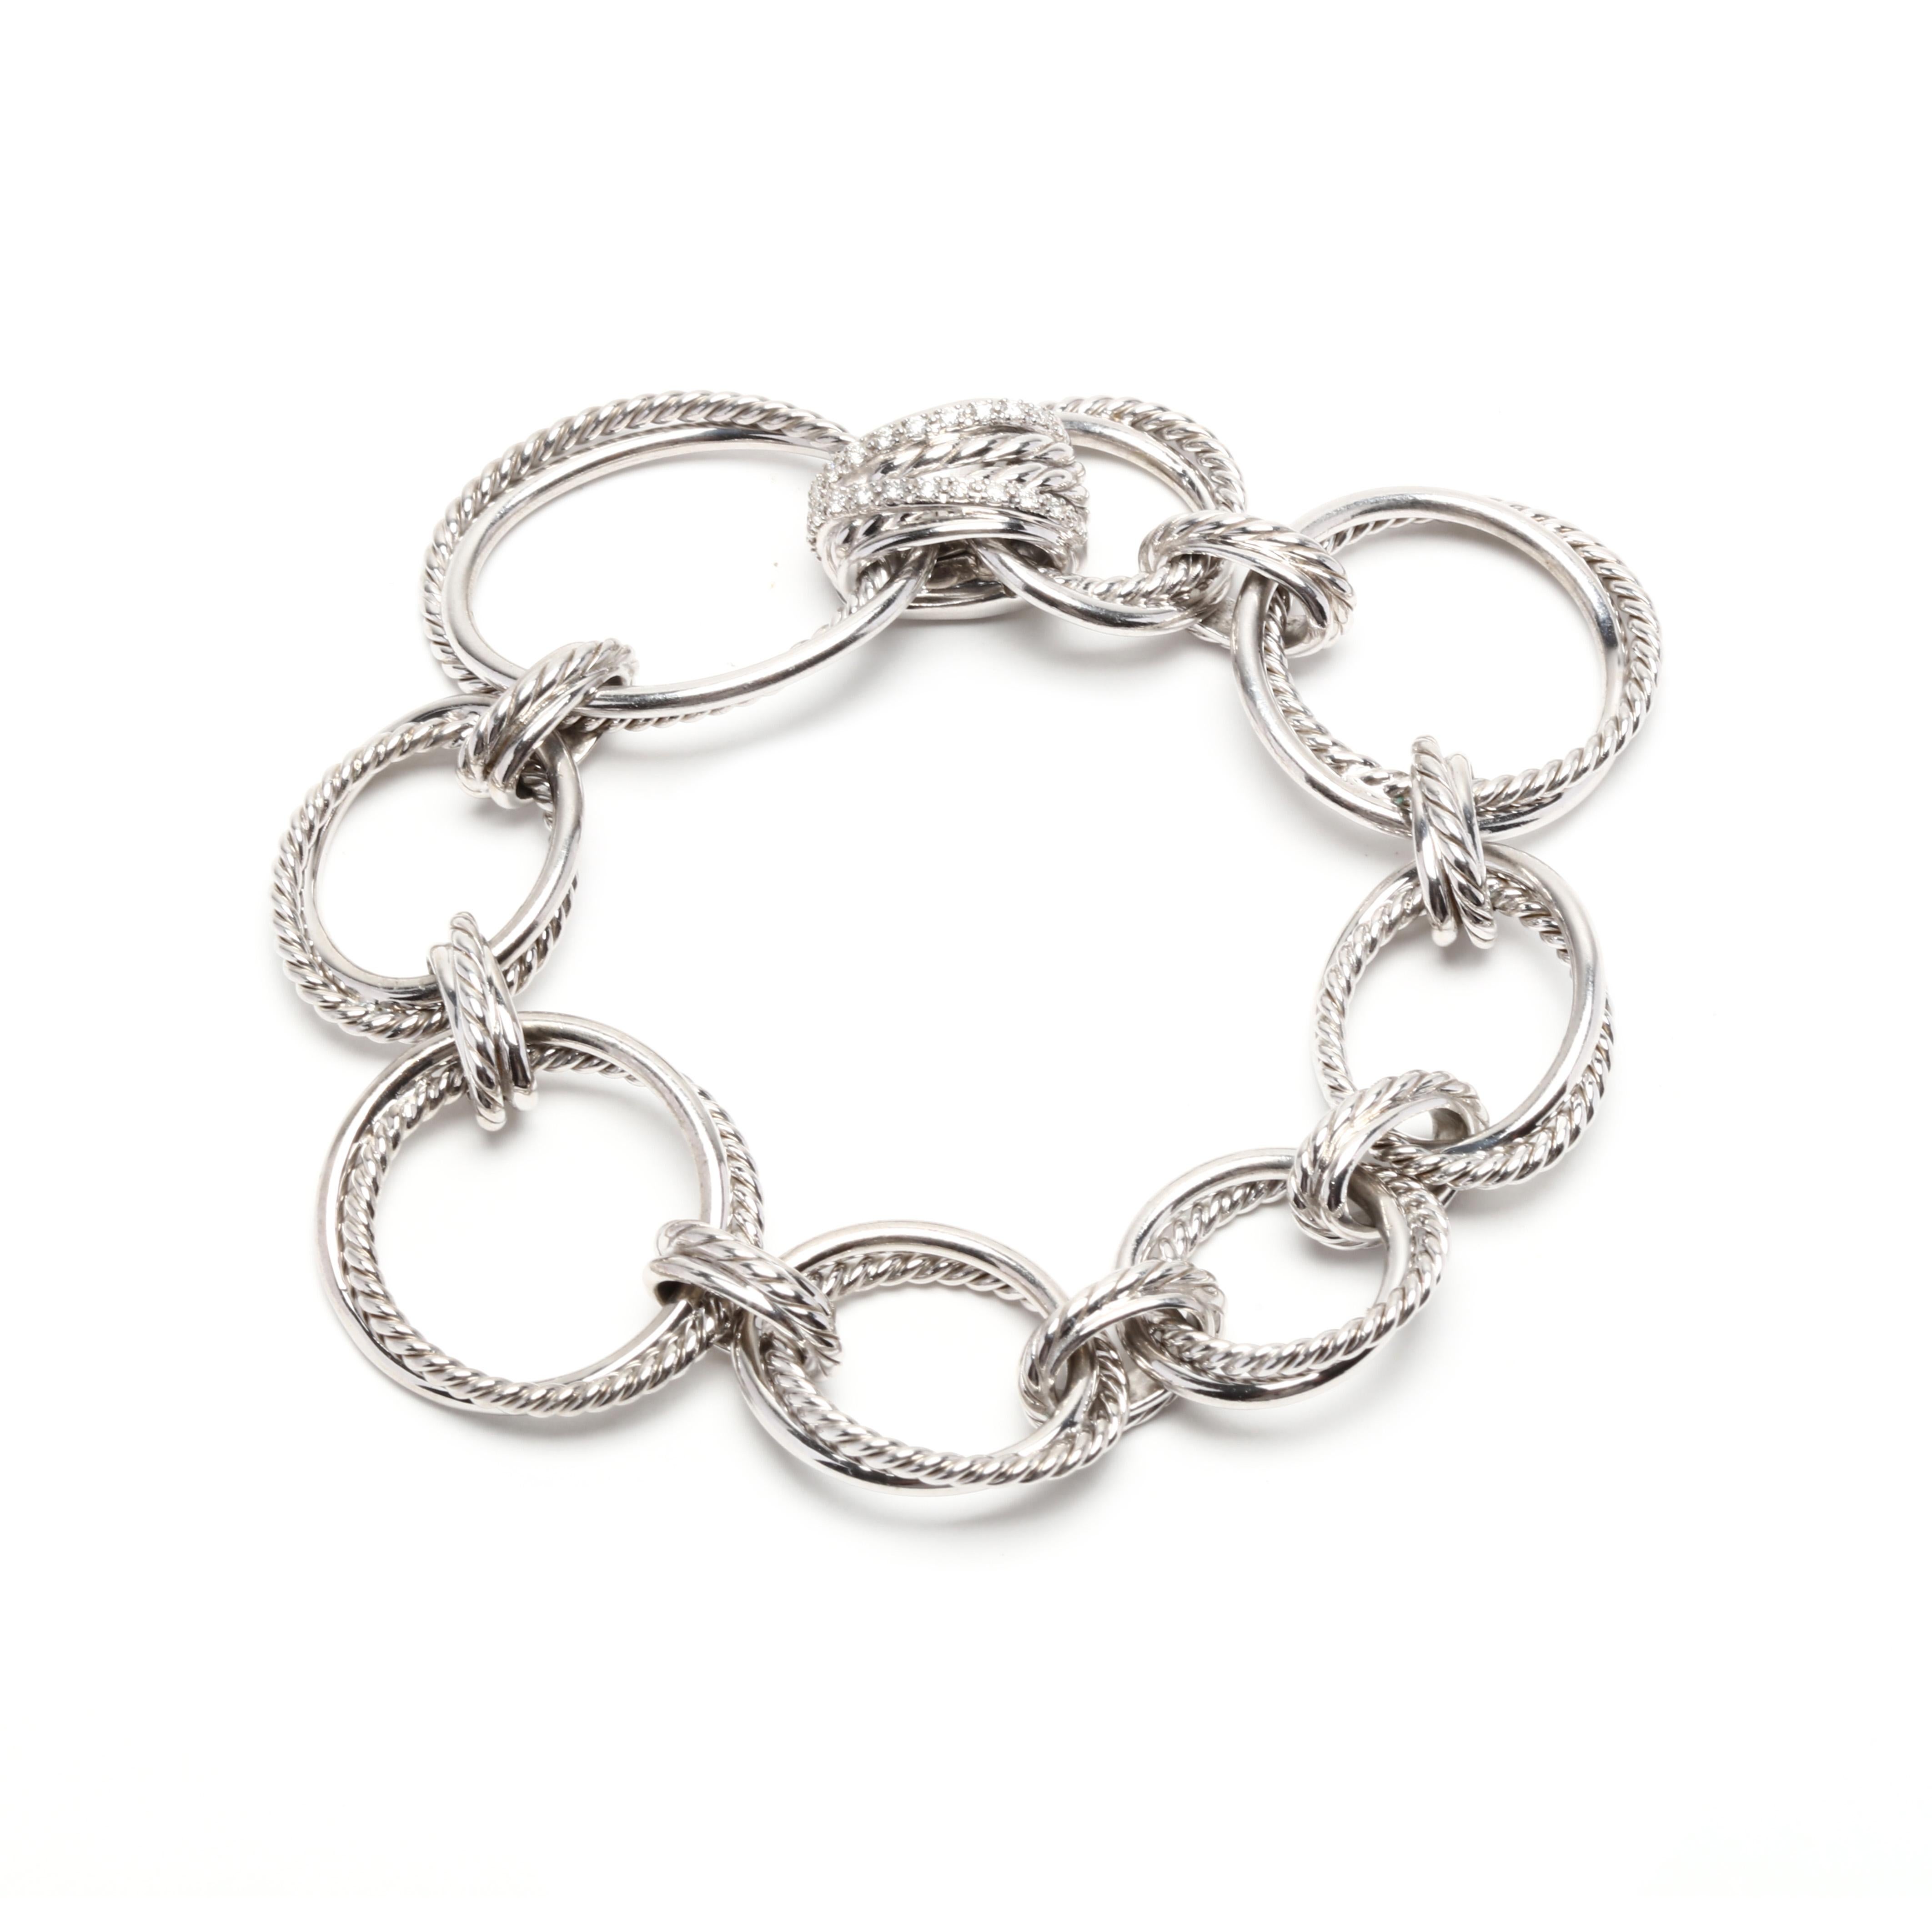 A David Yurman sterling silver and diamond infinity link bracelet. This bracelet features various size flat oval links with on polished and one cable motif row twisted together and with a diamond set clasp.

Stones:

- diamonds, 24 stones

- full